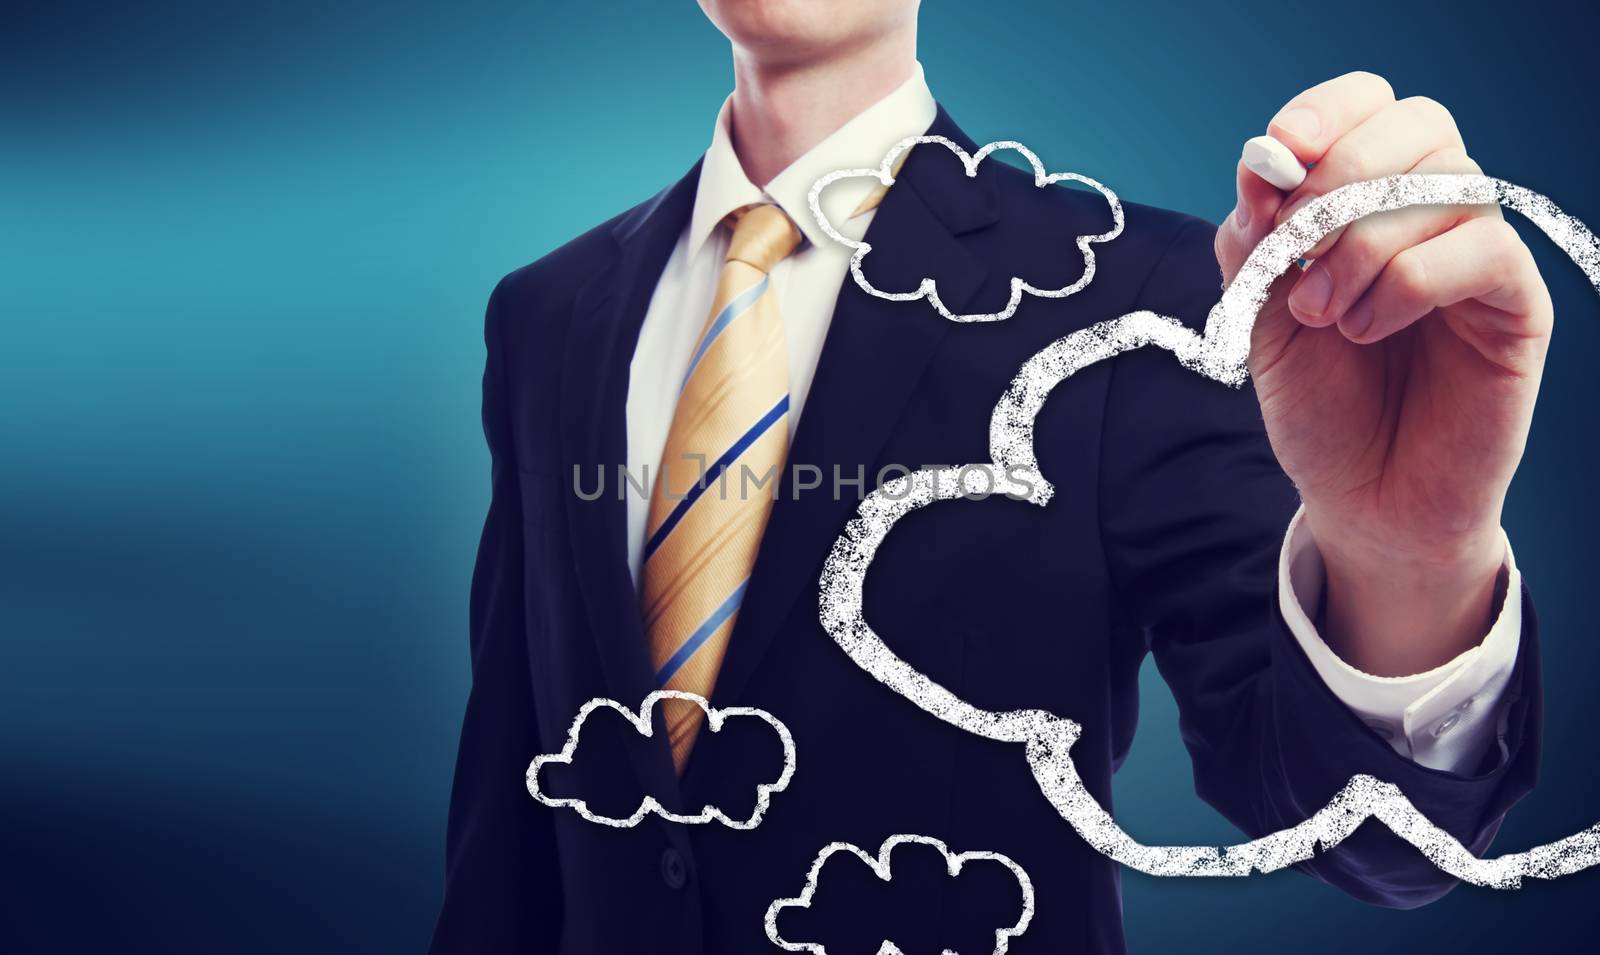 Business man with connectivity via cloud computing concept